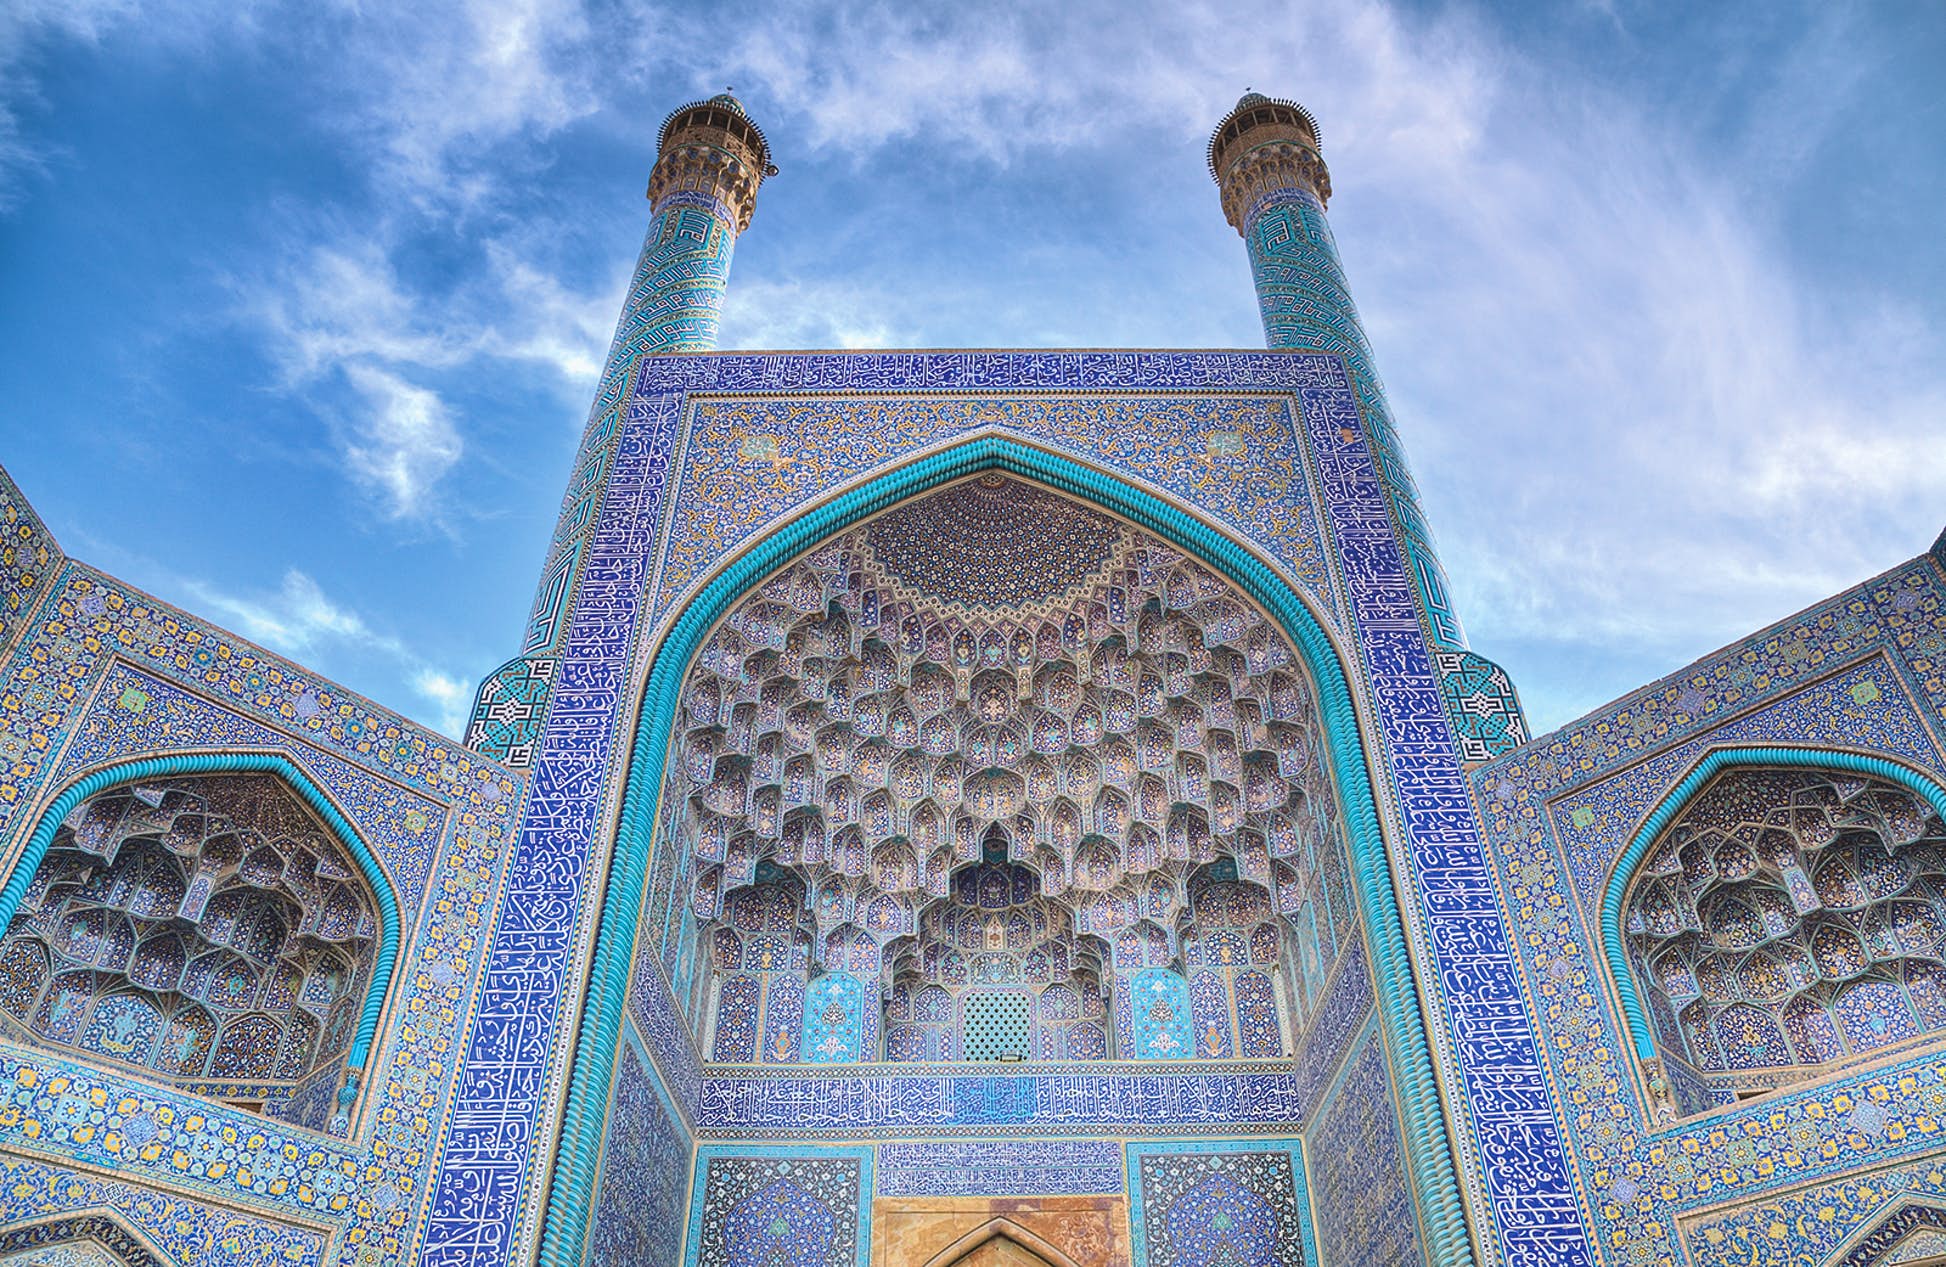 Iran has many fine examples of Islamic architecture, but the Shah Mosque, or Masjed-e-Shah, might just top them all © Ravi Tahilramani / Getty Images